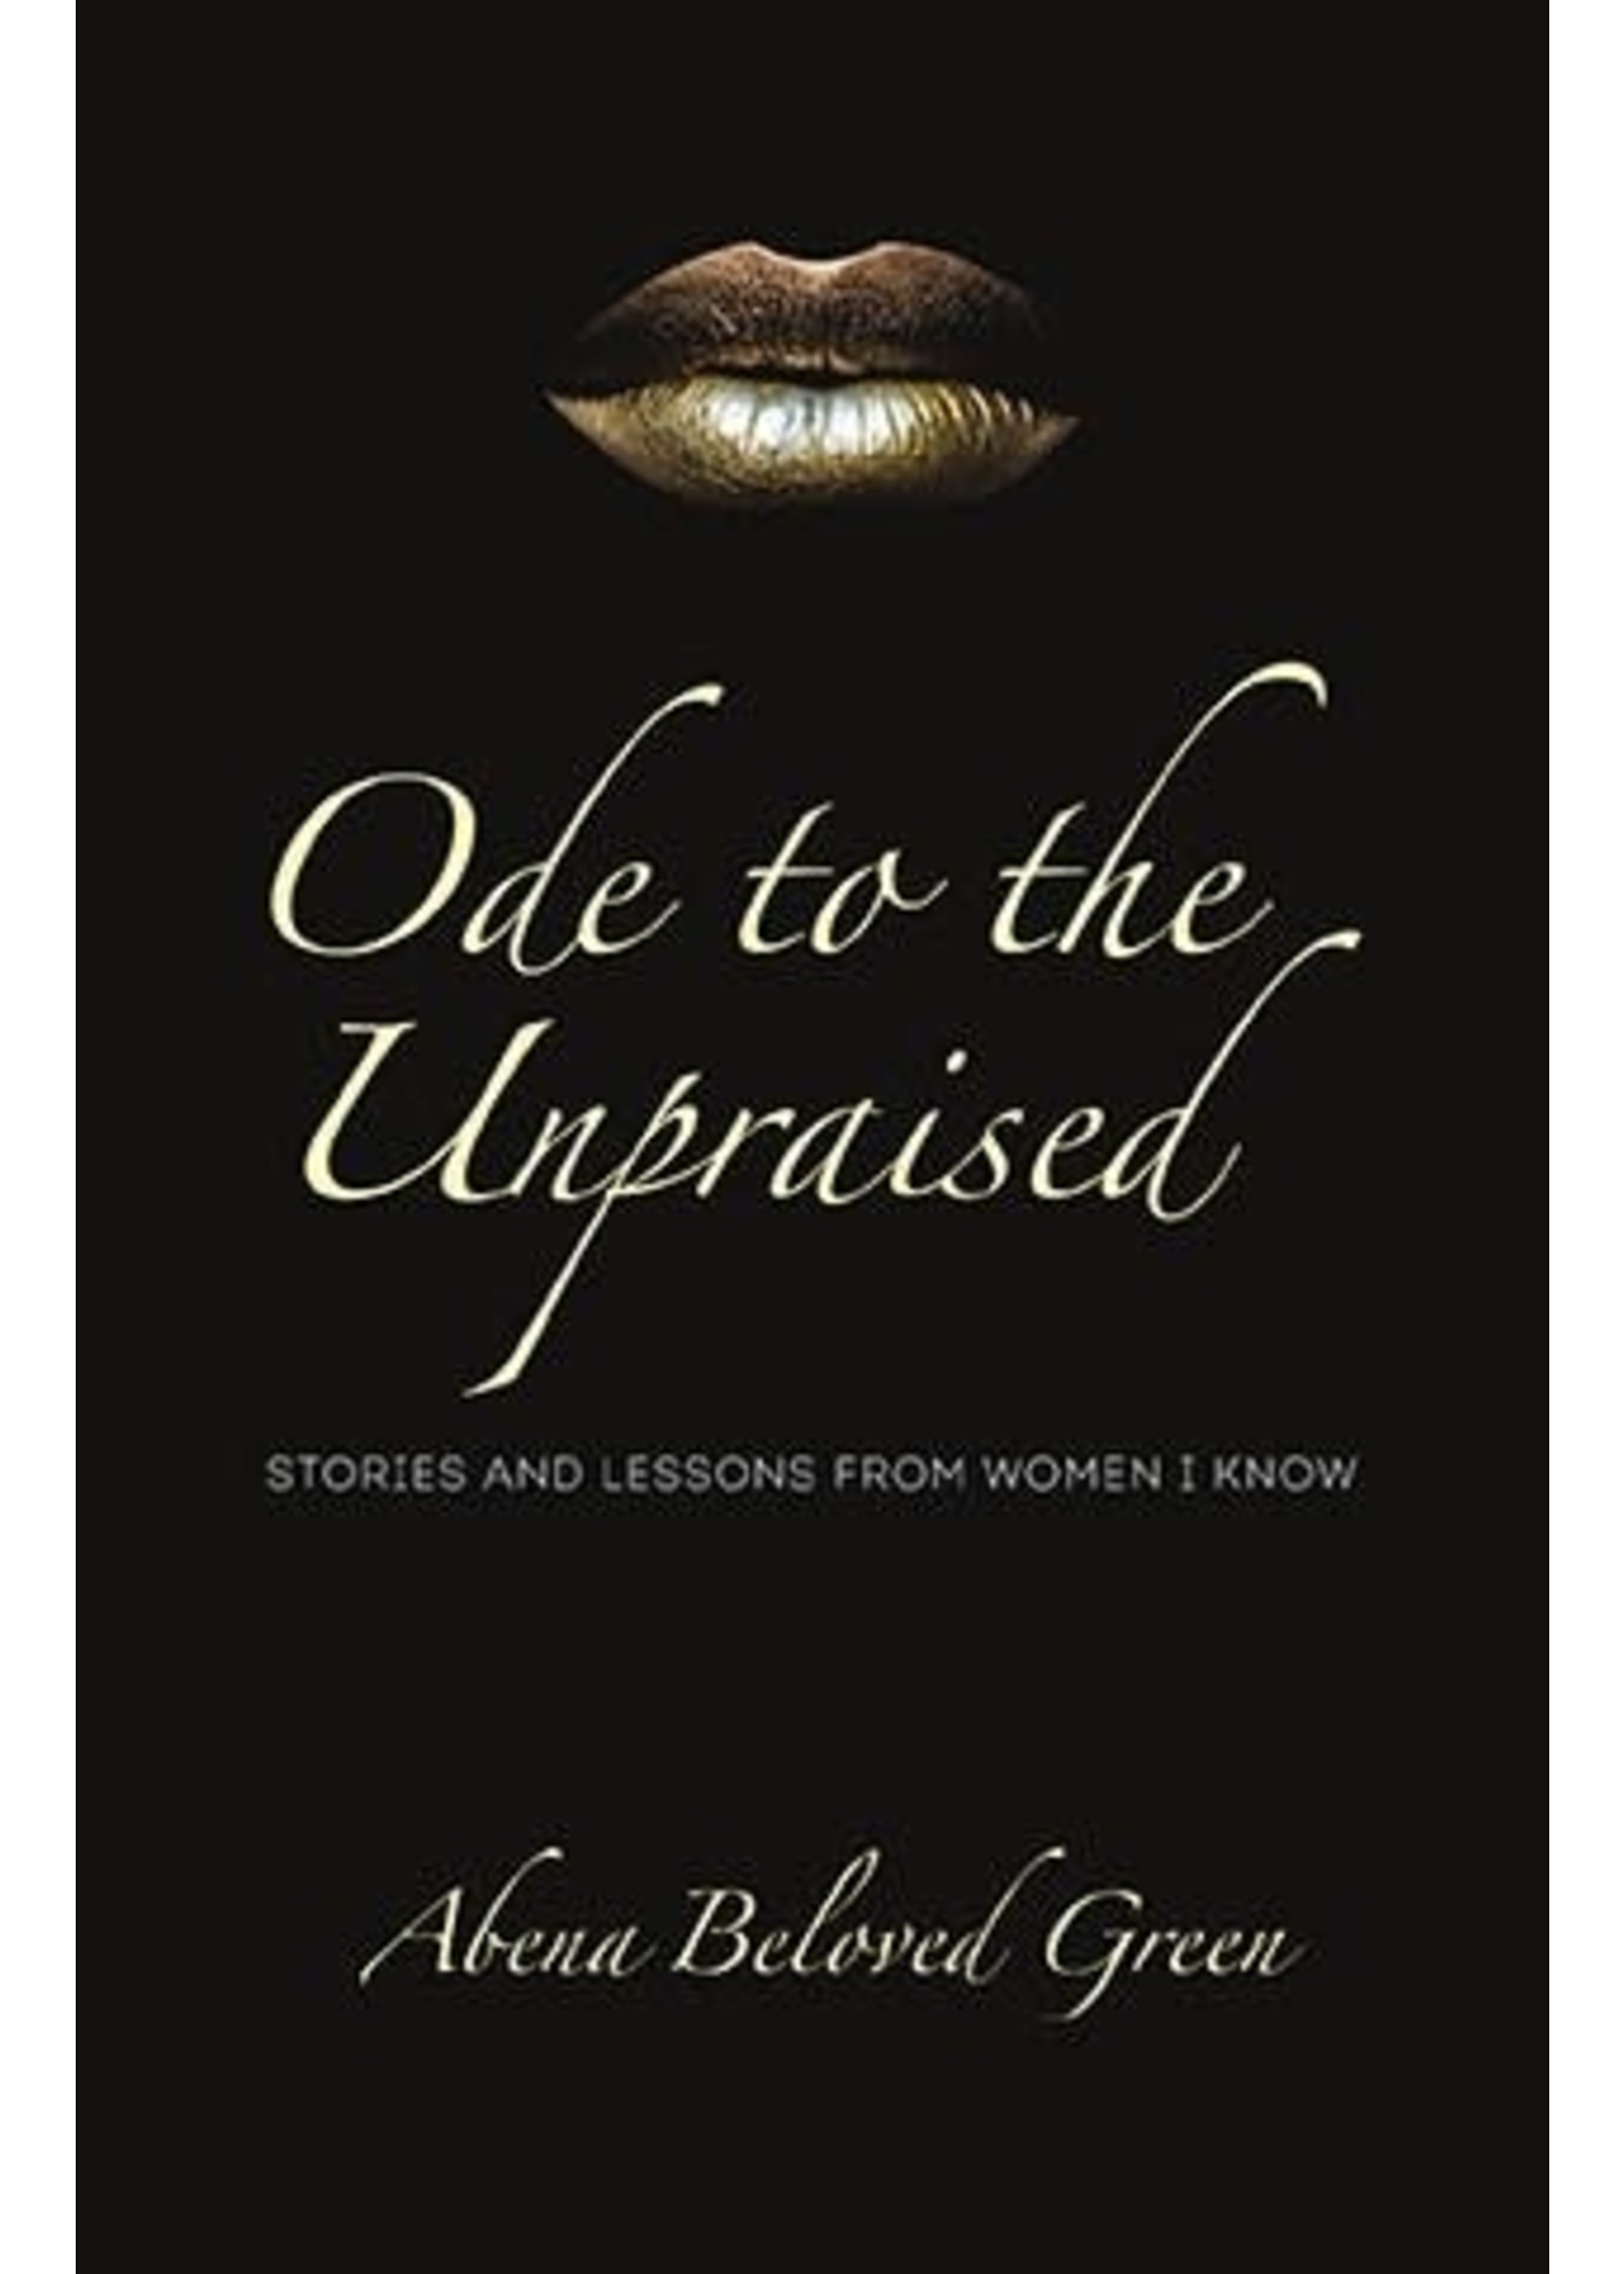 Ode to the Unpraised: Stories and Lessons from Women I Know by Abena Beloved Green